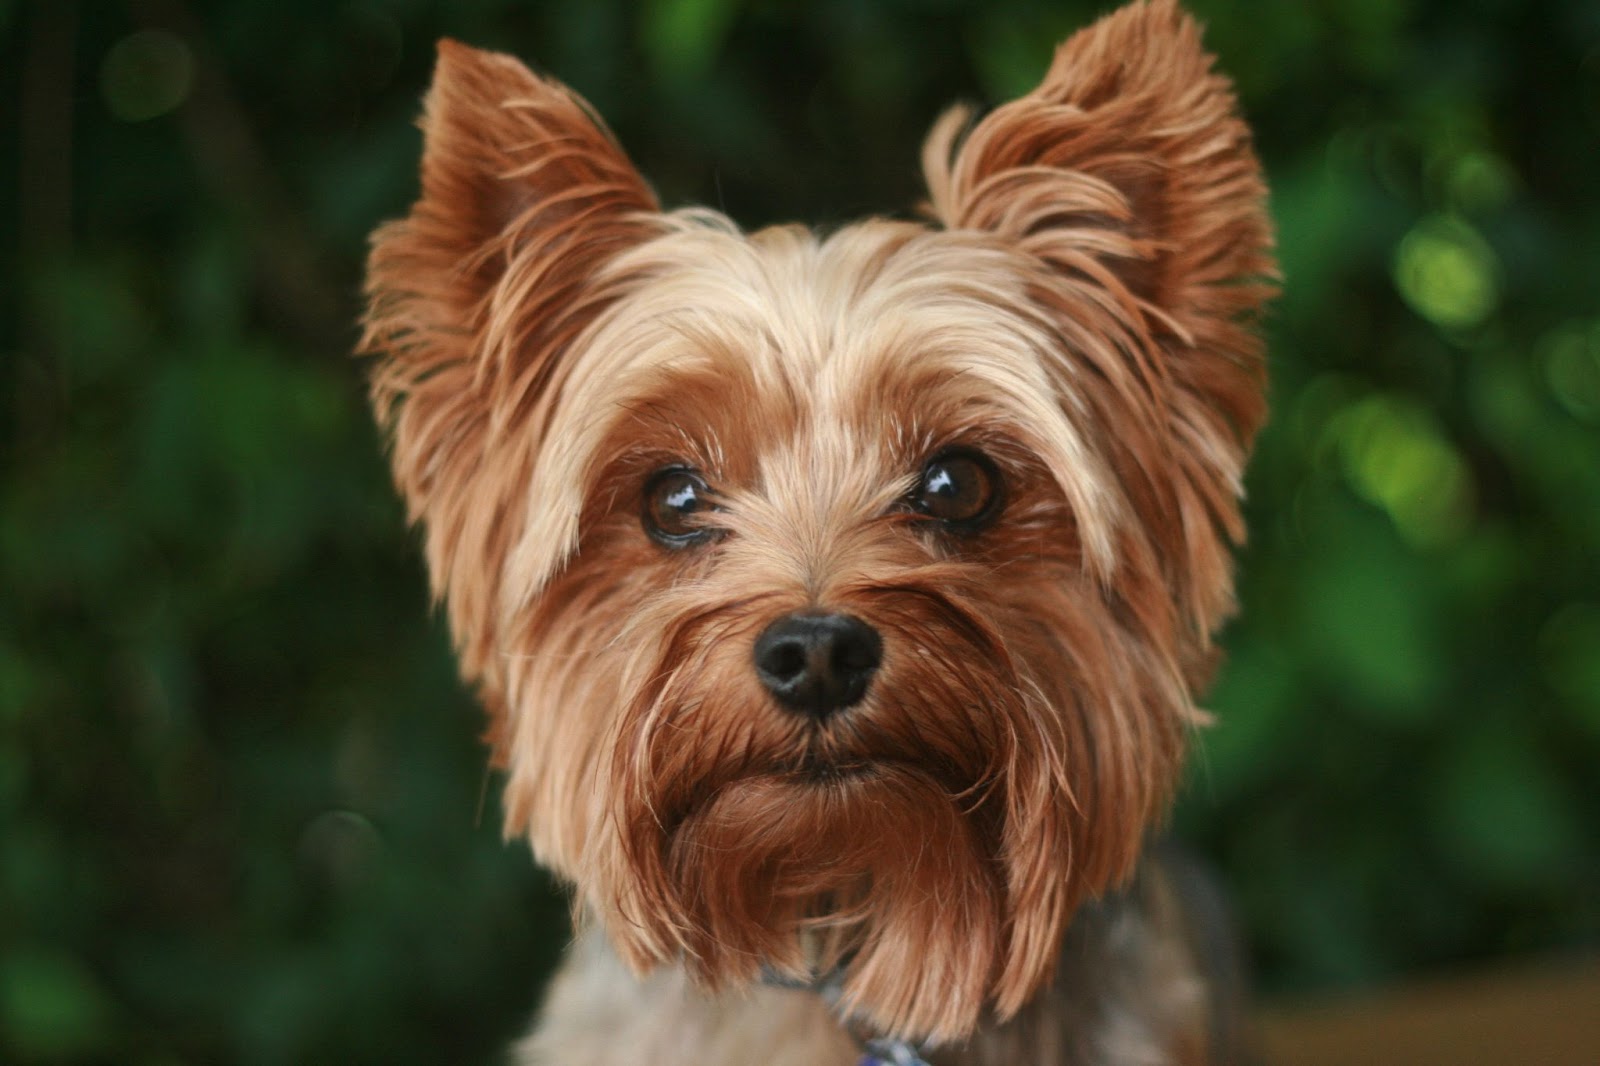 What Is the Best Haircut for a Yorkie?
